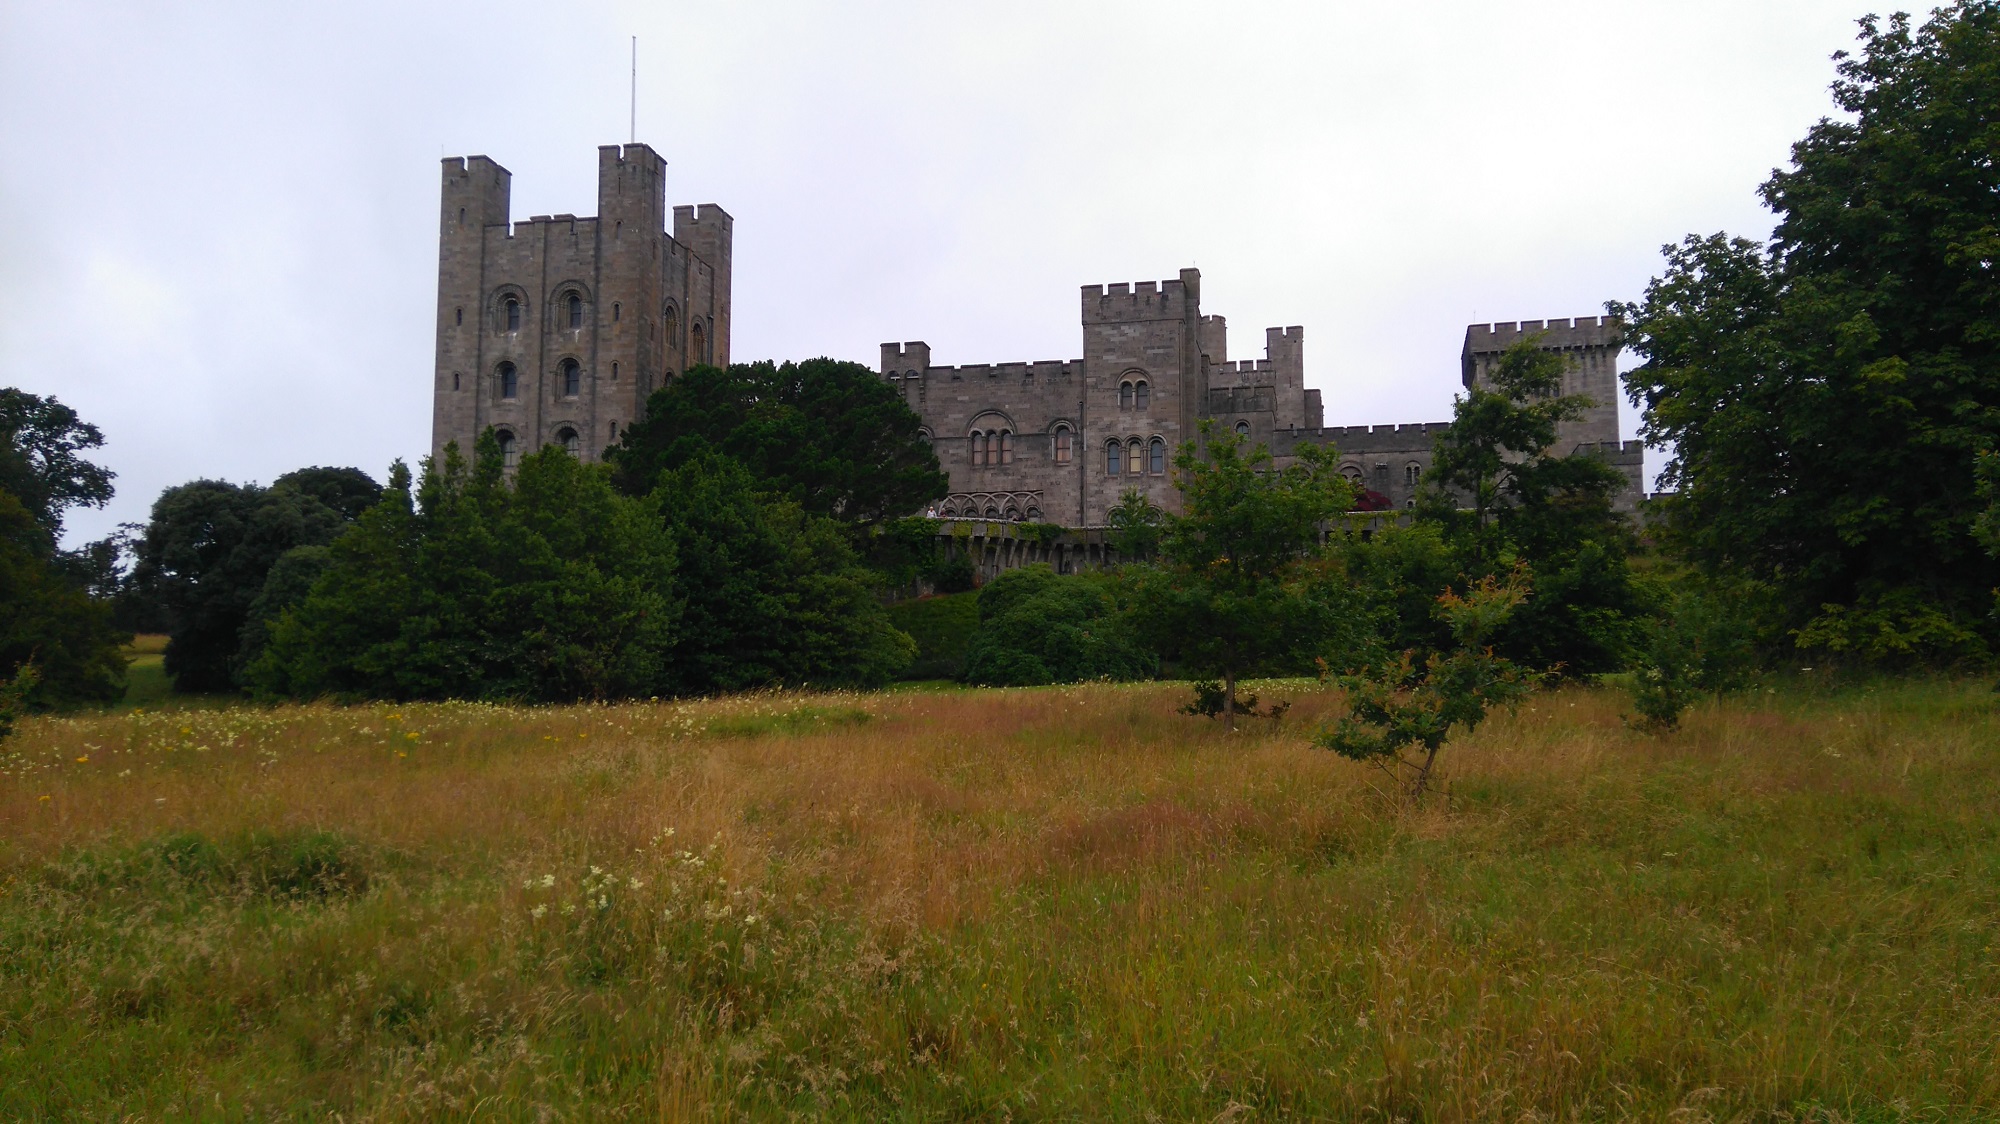 A castle viewed from within its grounds, with long grass in the foreground.